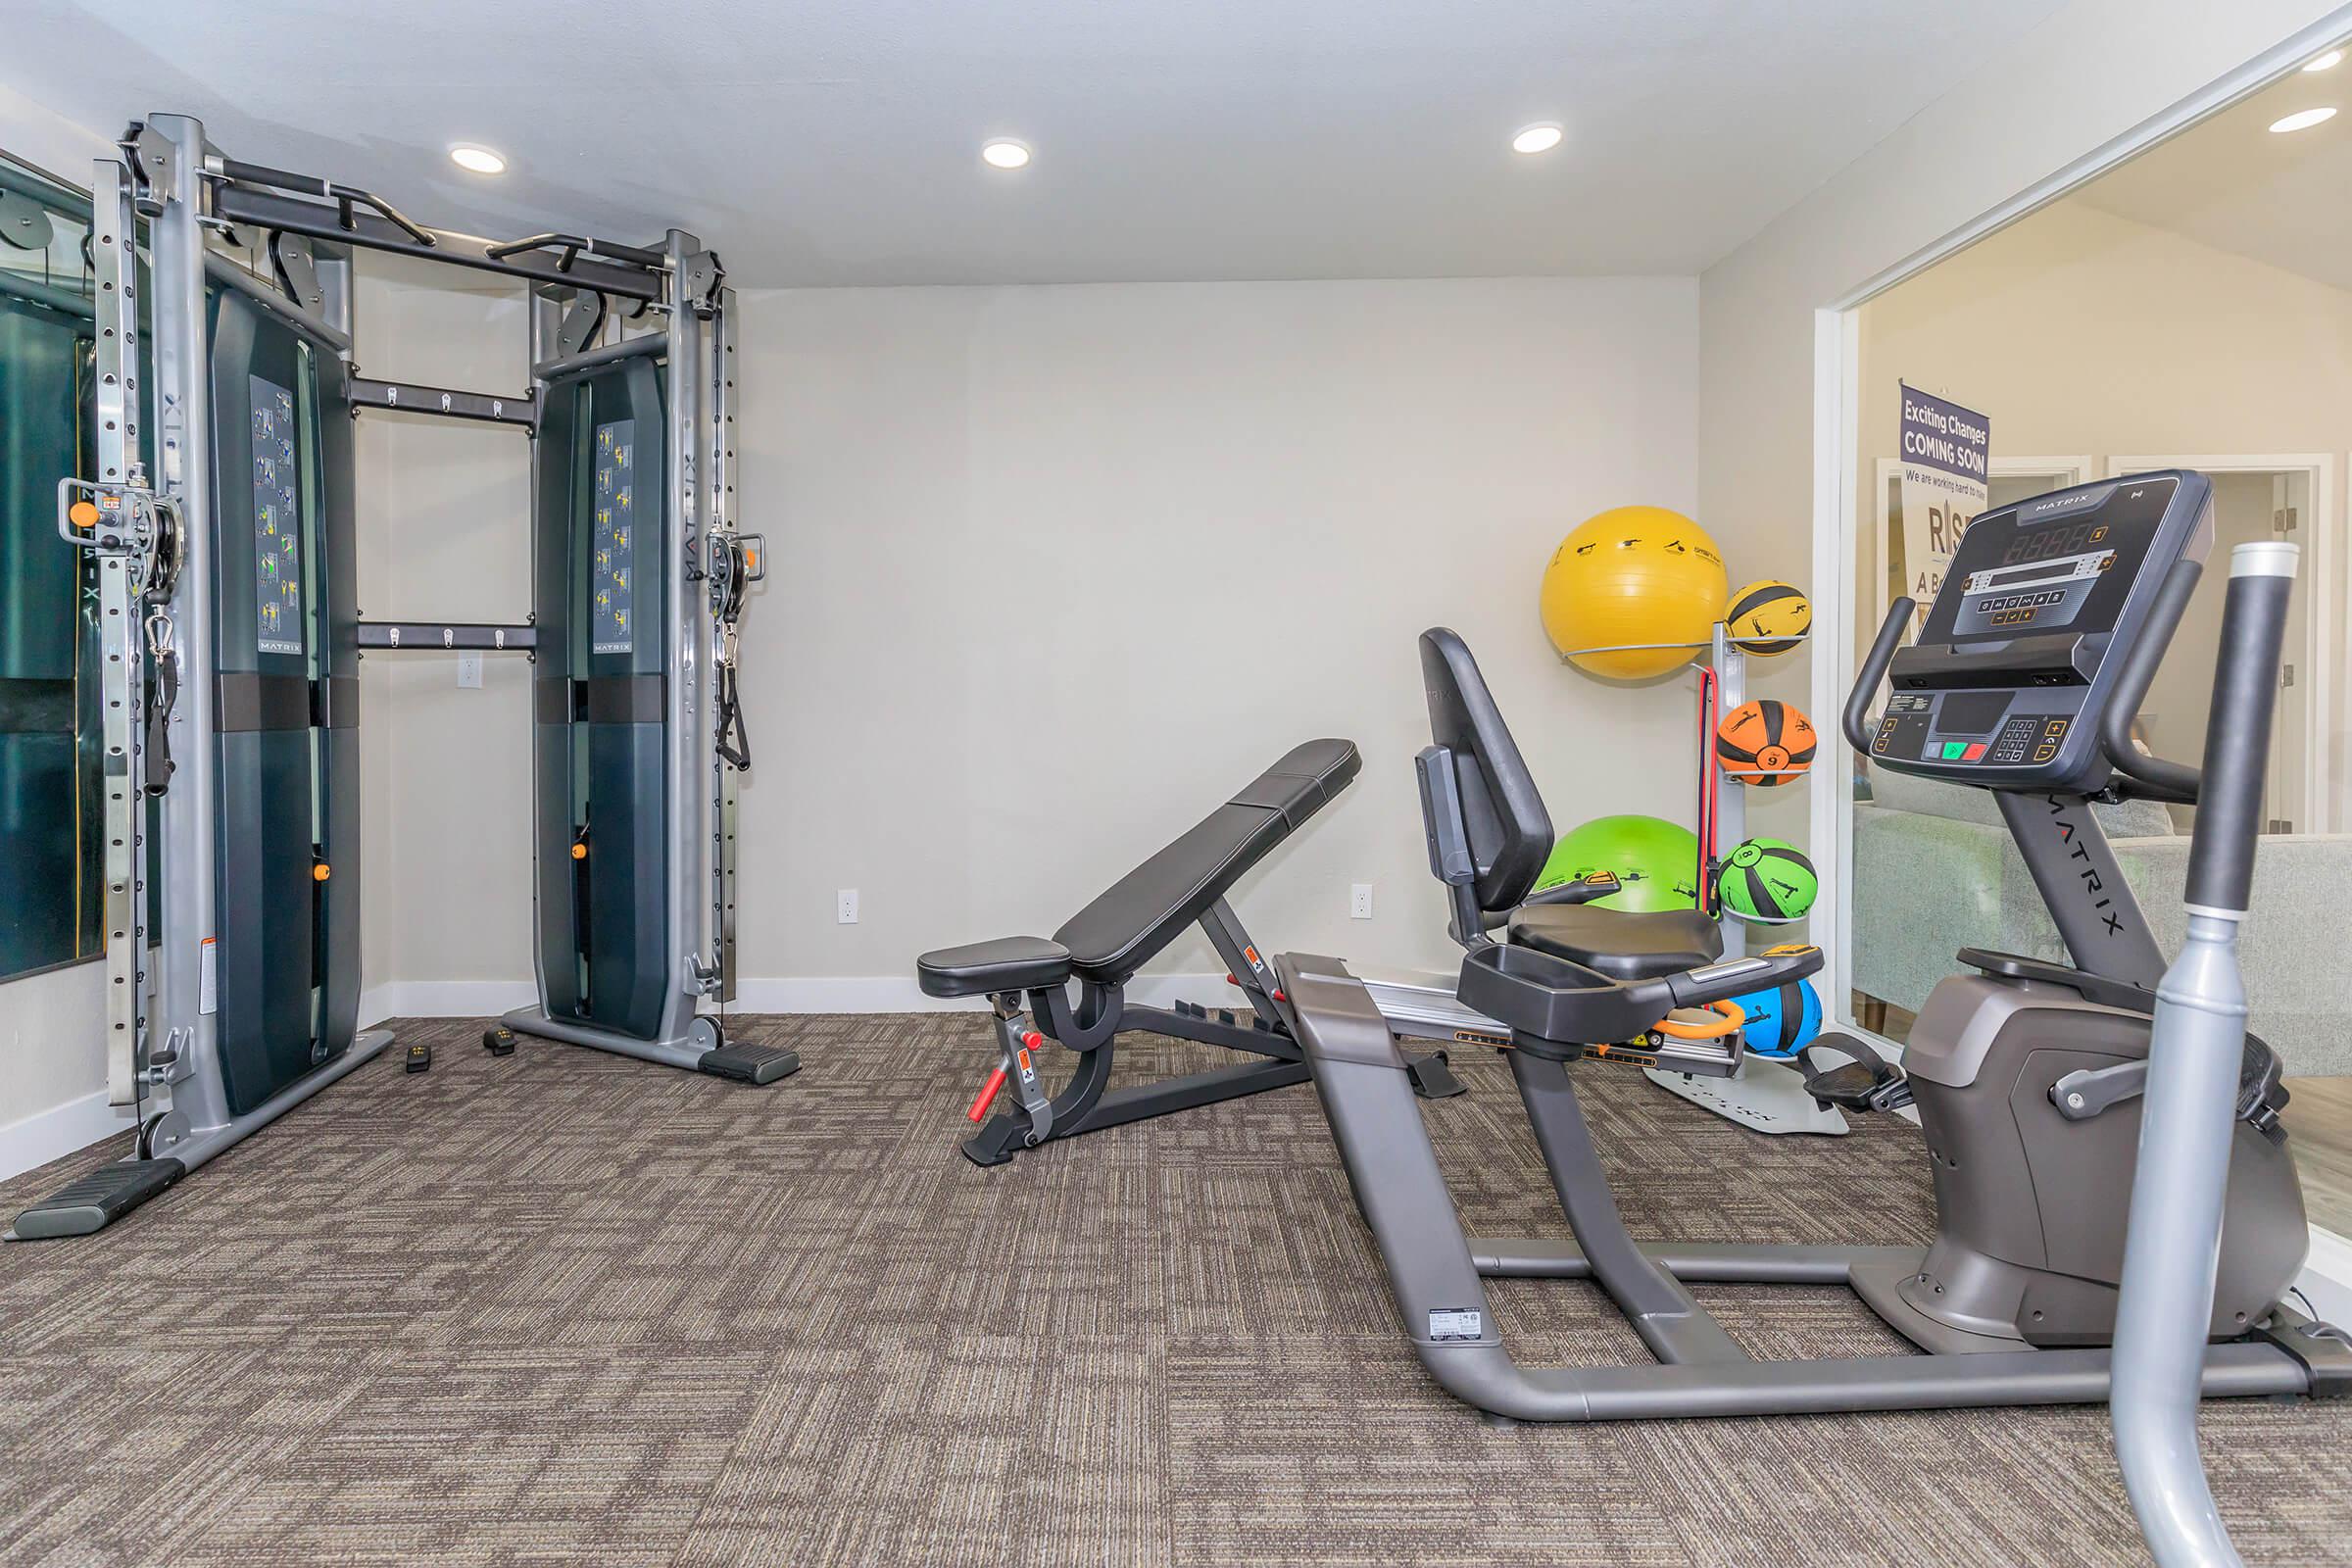 Rise Desert West fitness center and gym with workout equipment and exercise balls